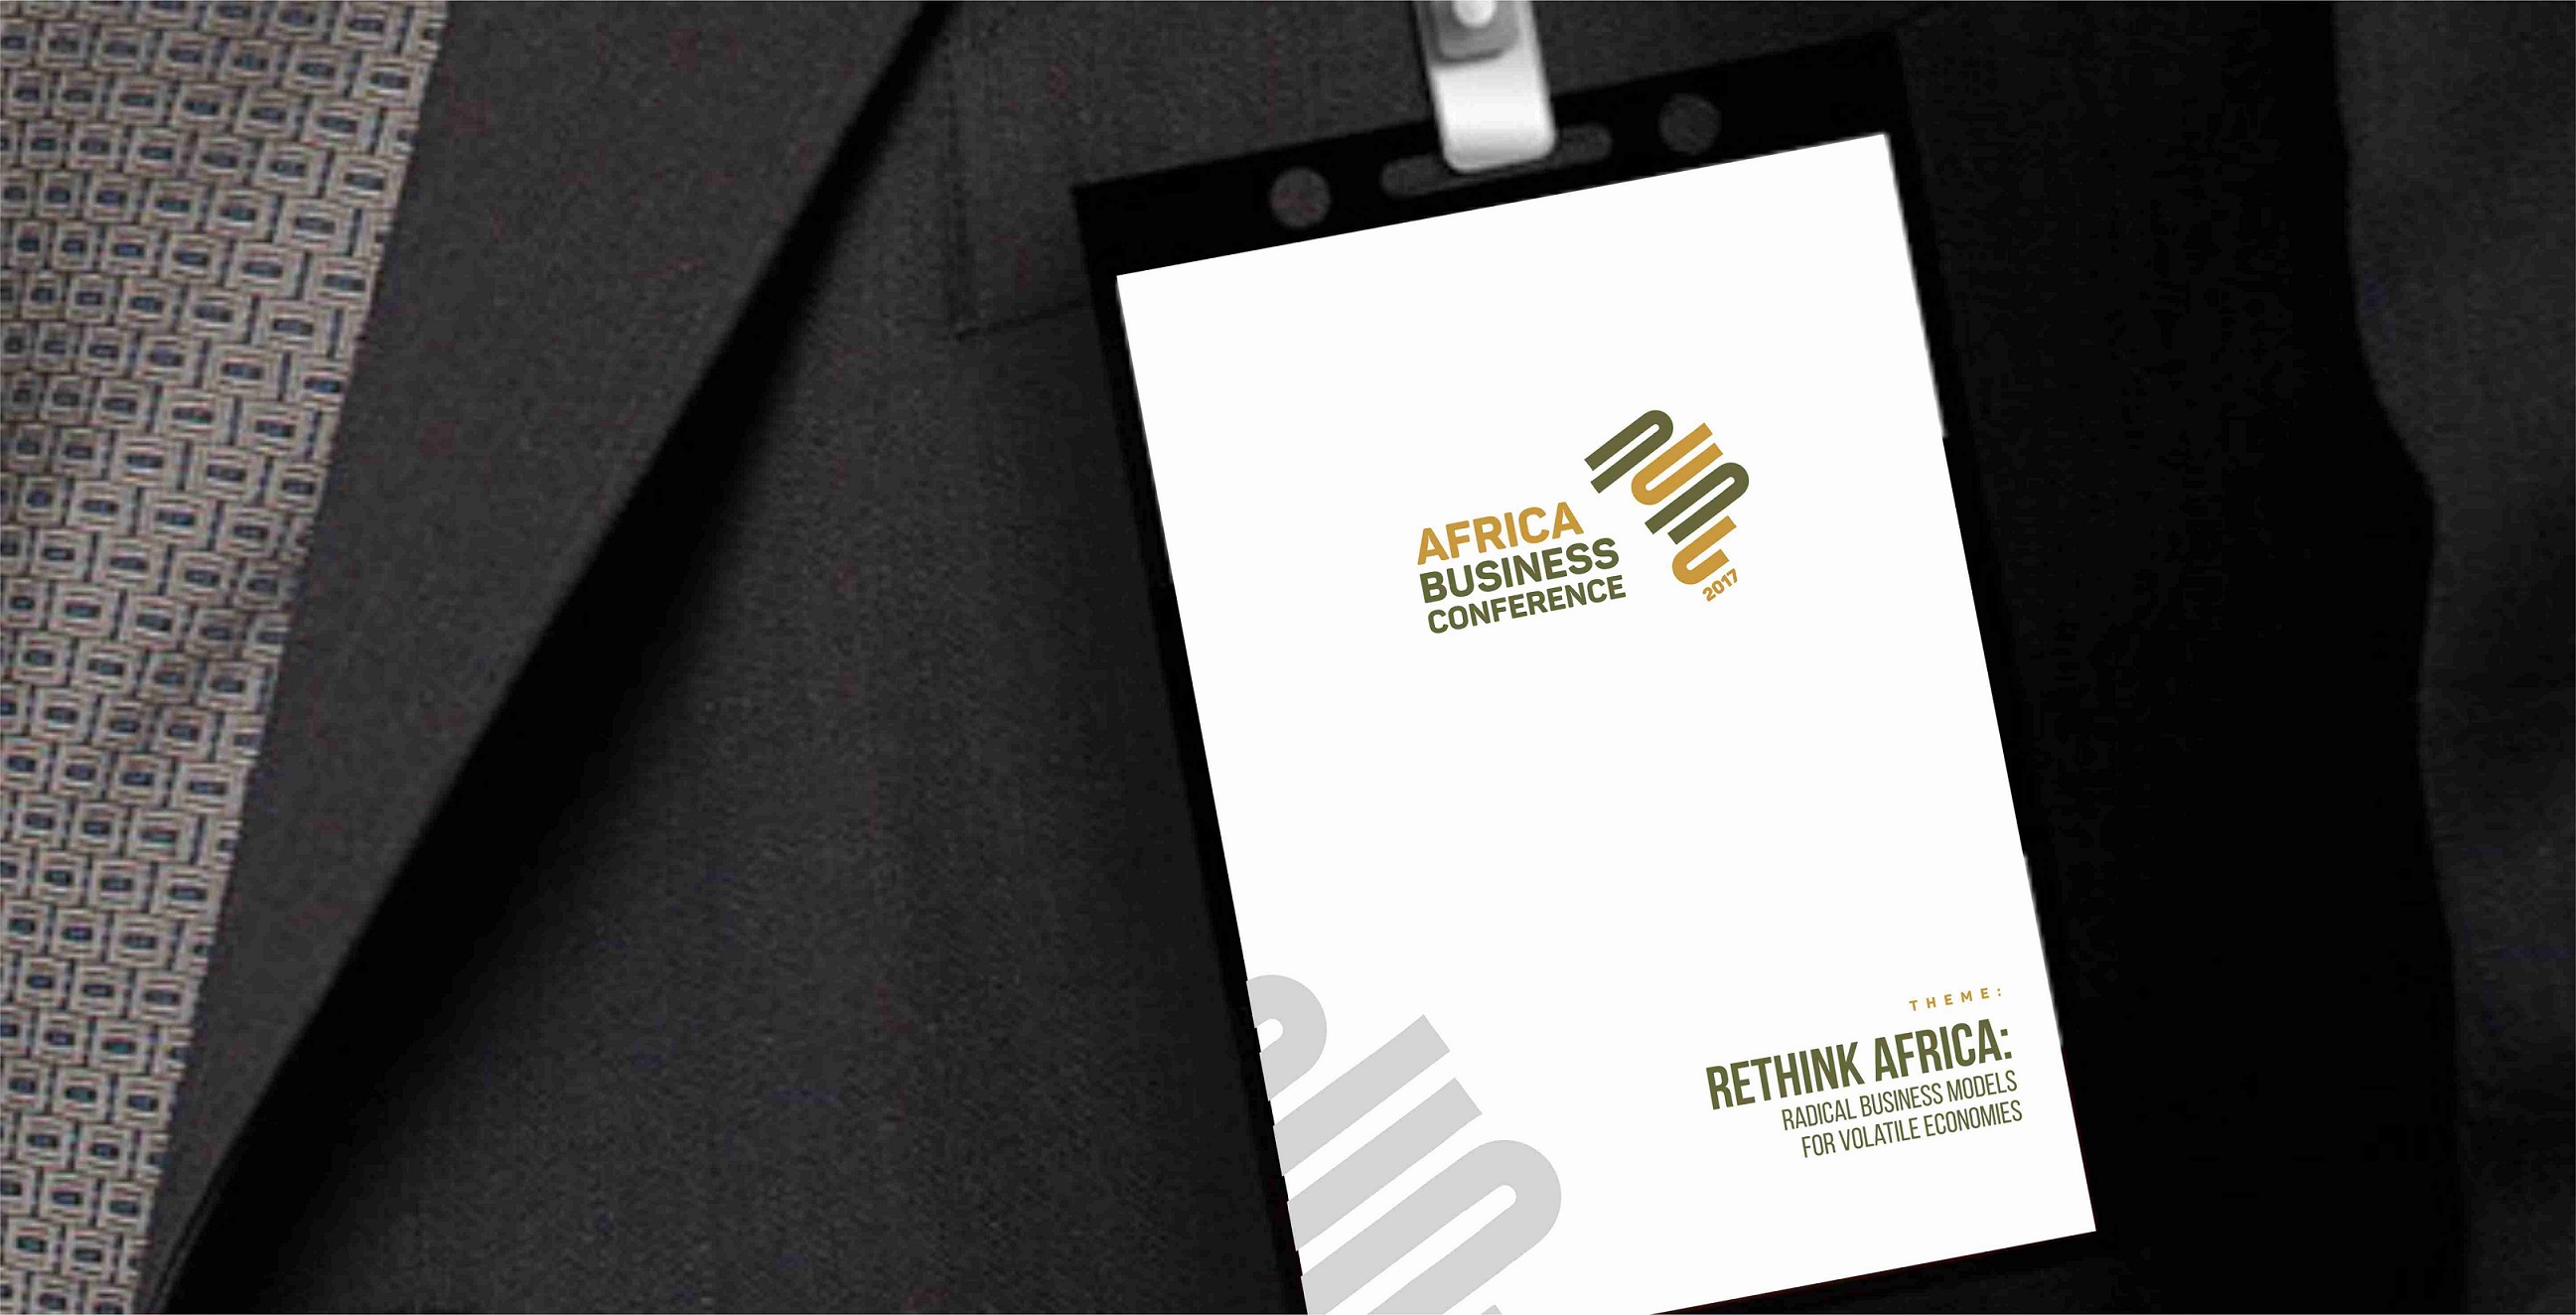 Africa Business Conference 2017